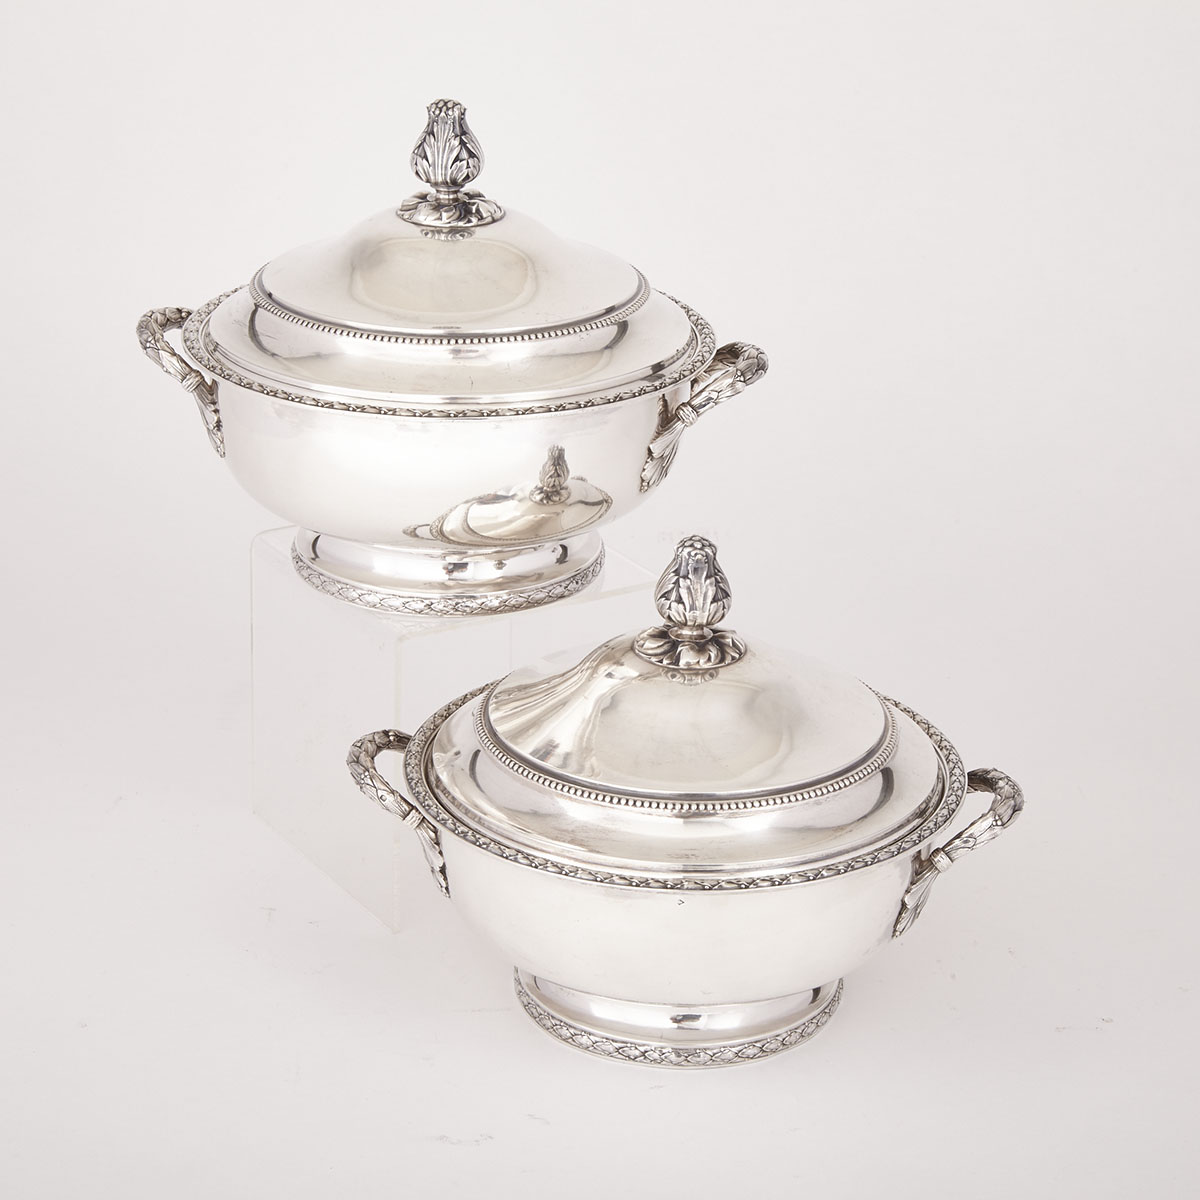 Pair of French Silver Covered Tureens, Ernest Prost, Paris, 20th century